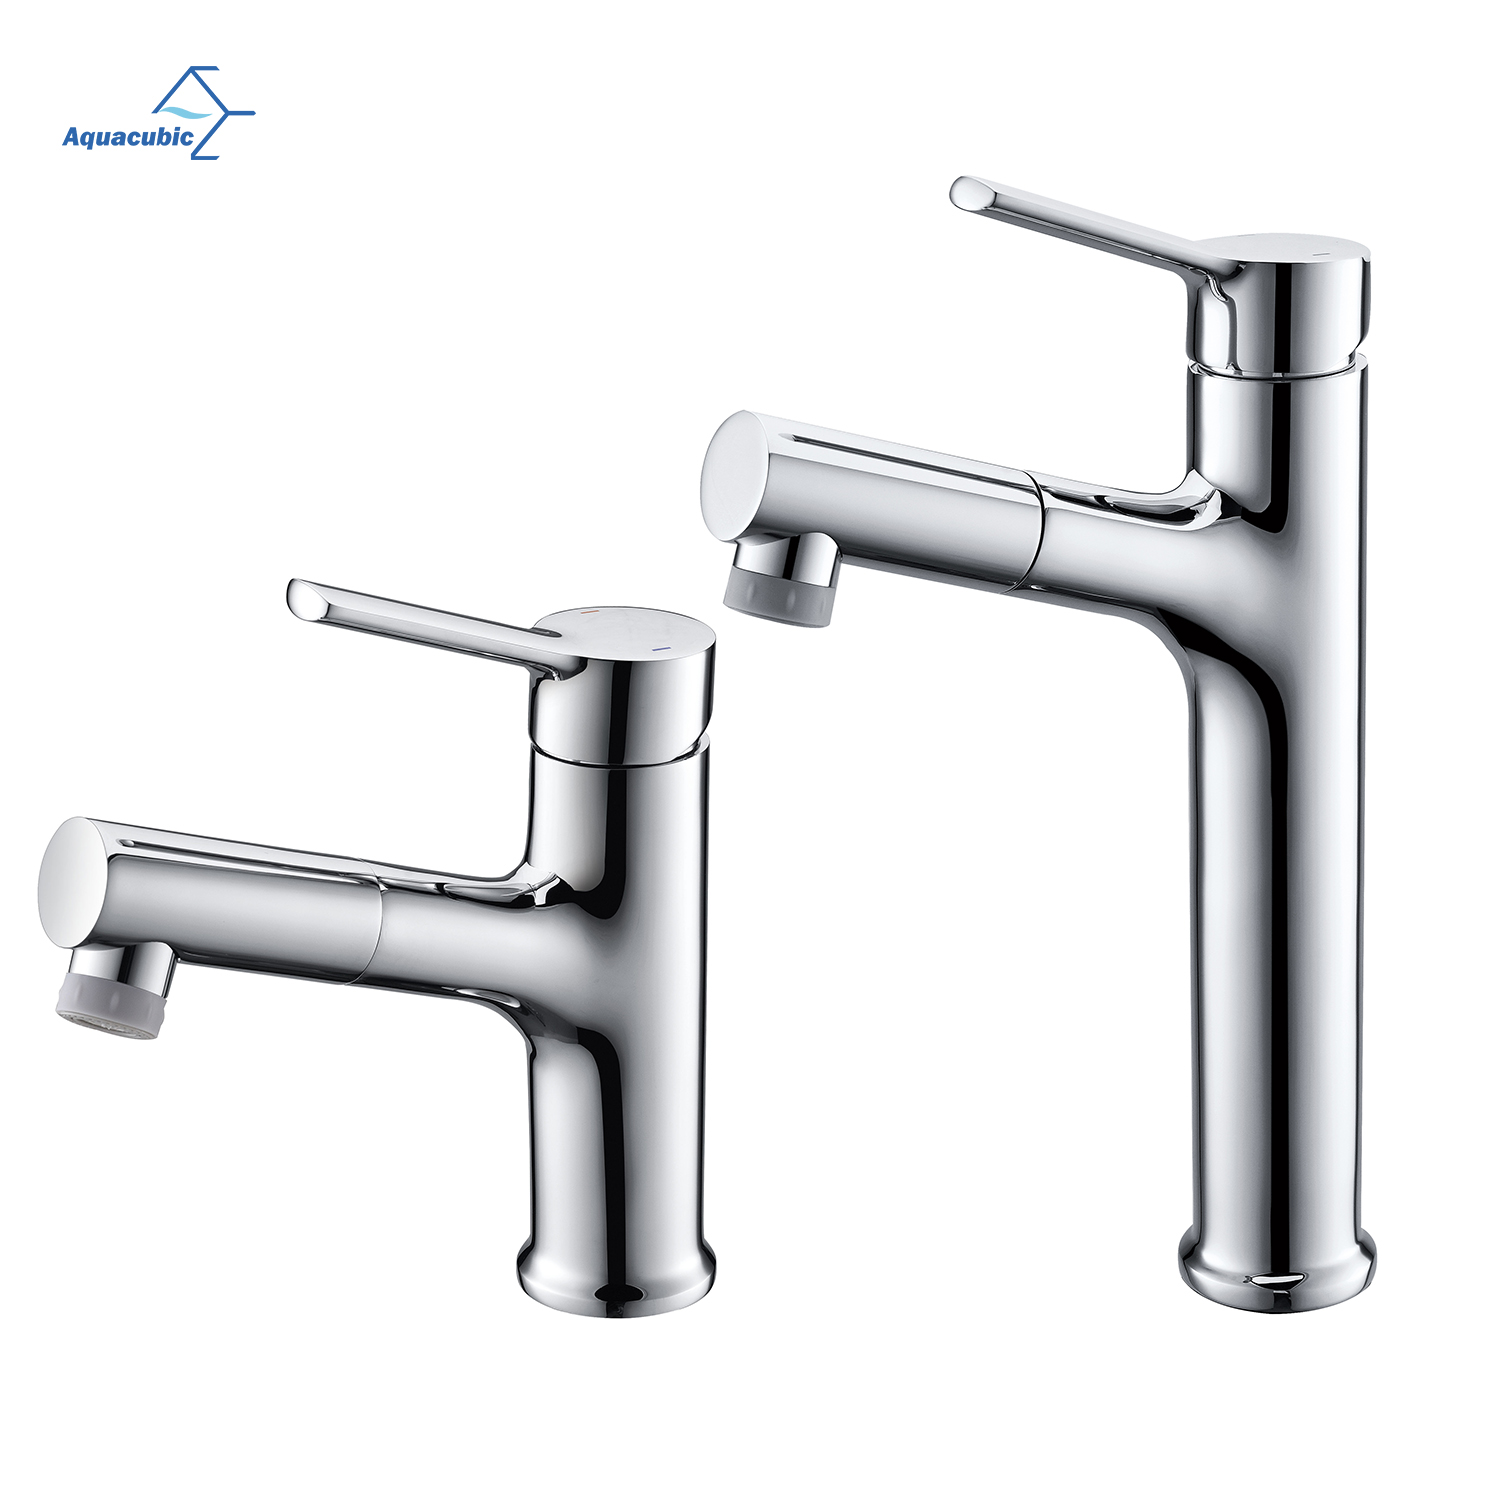 Aquacubic Factory Supplier 360 Rotating Chrome modern Wash Basin Faucets Pull out Bathroom Water Faucet